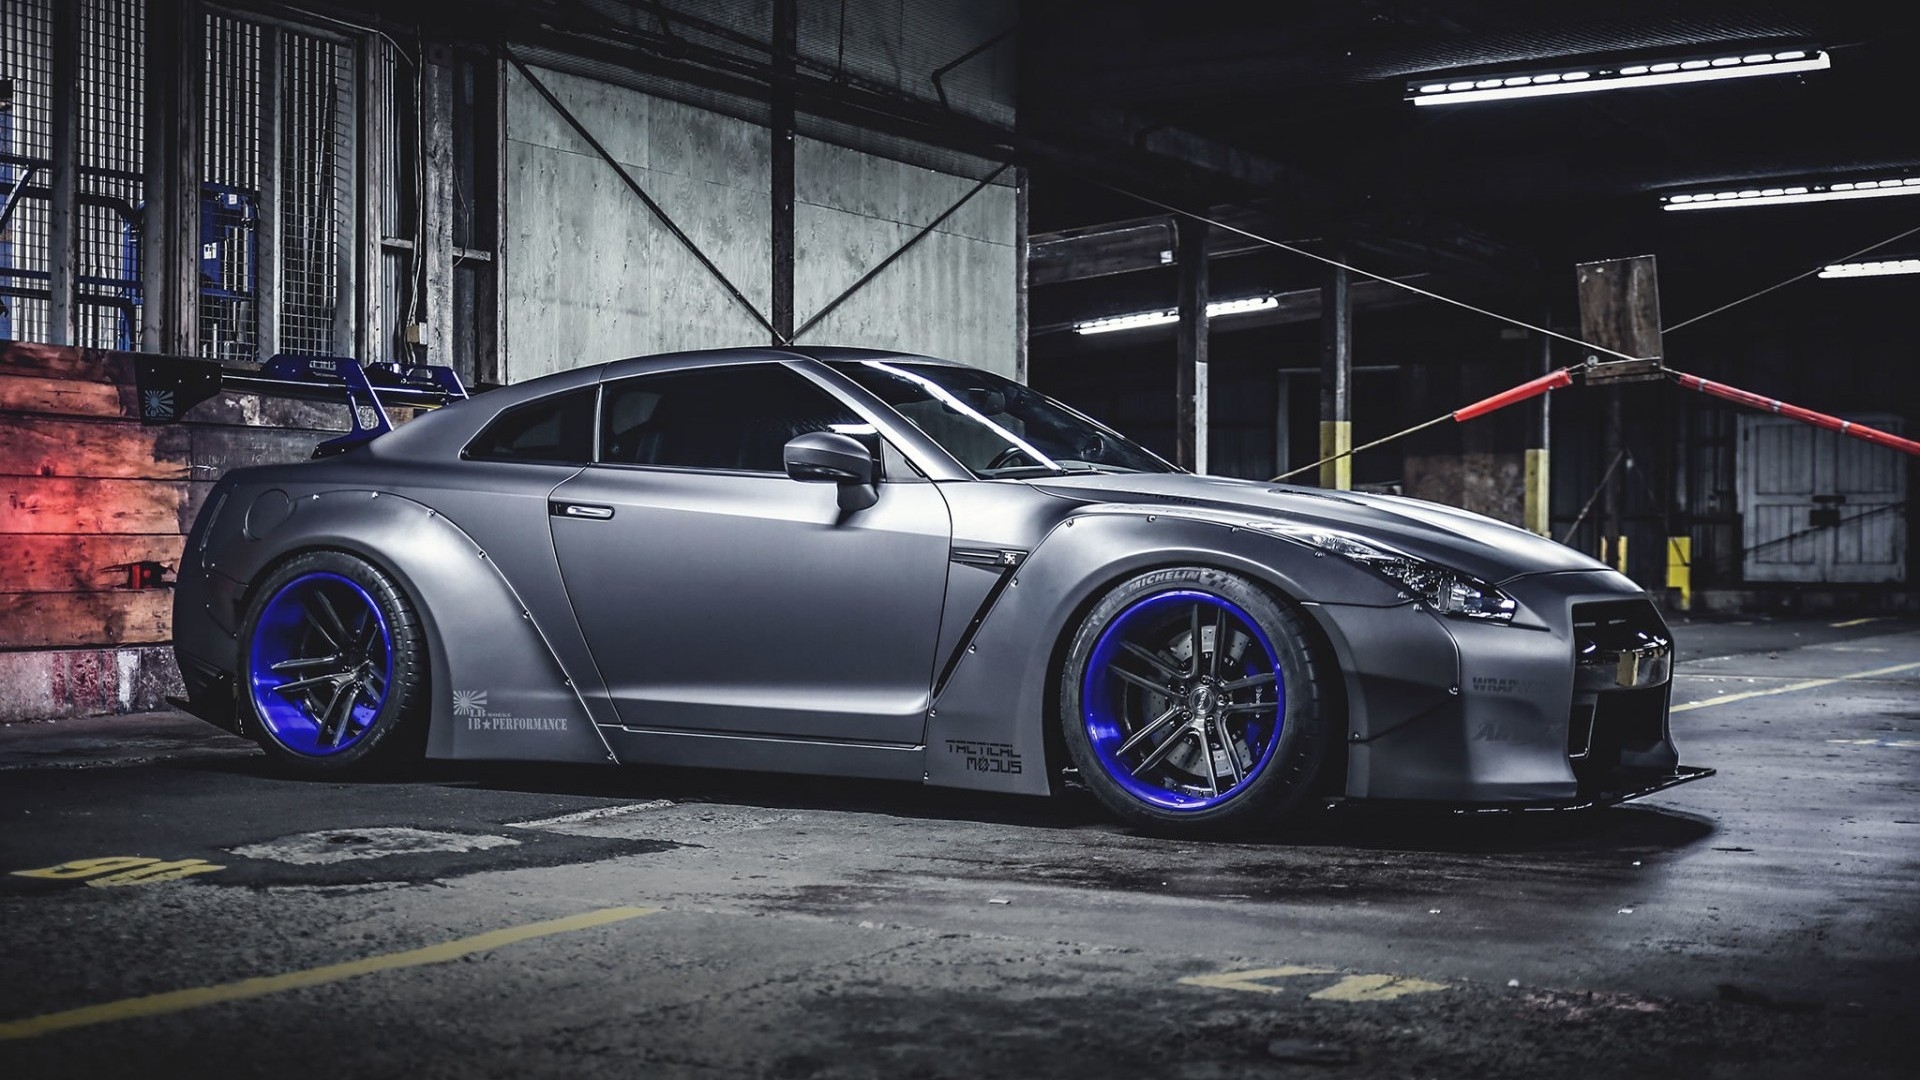 Lovely Nissan GT-R Liberty Walk for 1920 x 1080 HDTV 1080p resolution